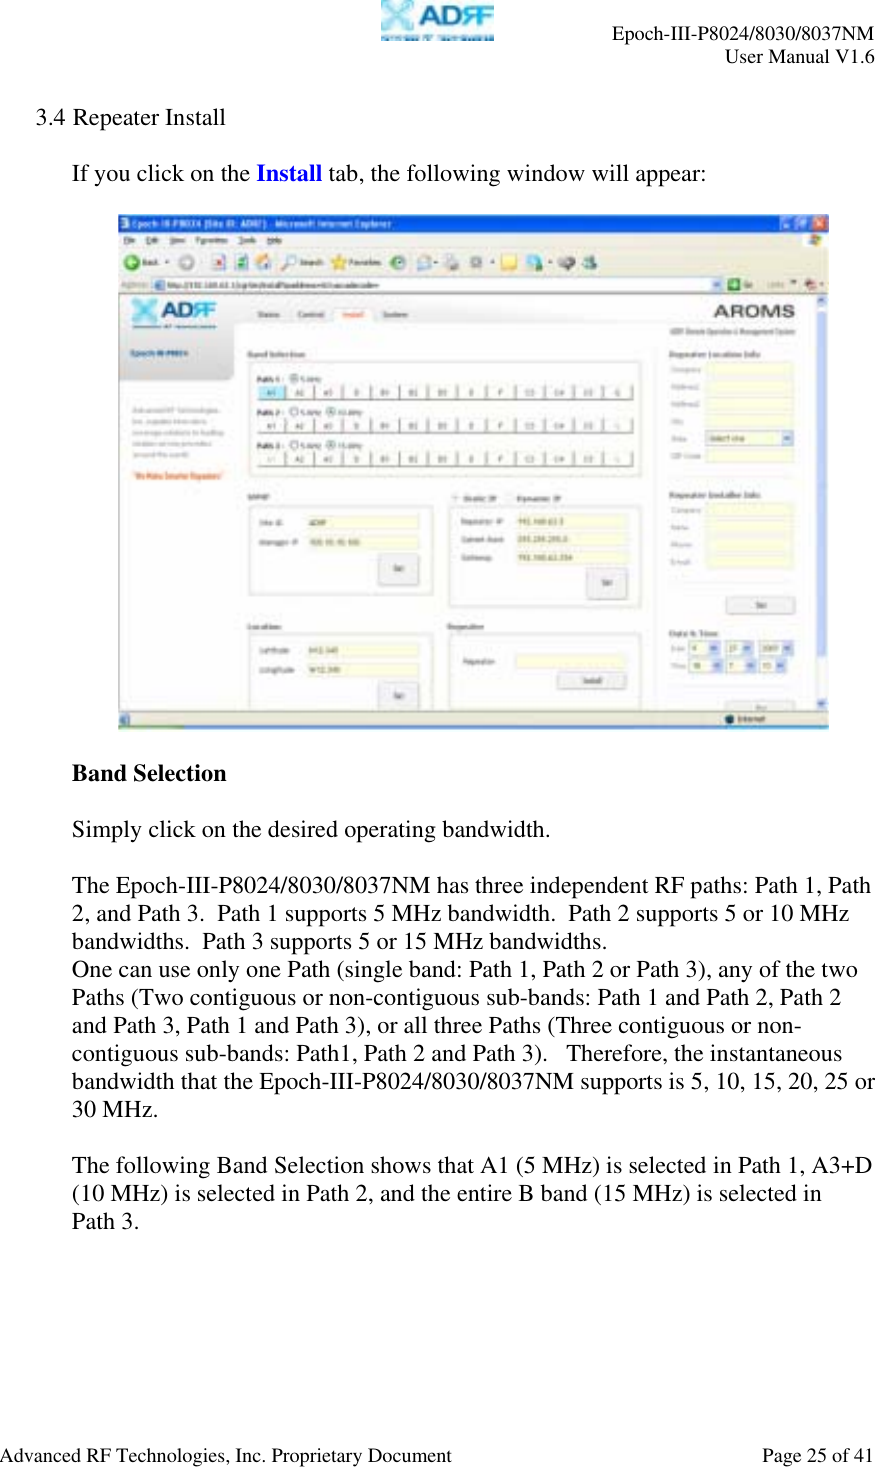     Epoch-III-P8024/8030/8037NM  User Manual V1.6  Advanced RF Technologies, Inc. Proprietary Document  Page 25 of 41  3.4 Repeater Install  If you click on the Install tab, the following window will appear:    Band Selection  Simply click on the desired operating bandwidth.  The Epoch-III-P8024/8030/8037NM has three independent RF paths: Path 1, Path 2, and Path 3.  Path 1 supports 5 MHz bandwidth.  Path 2 supports 5 or 10 MHz bandwidths.  Path 3 supports 5 or 15 MHz bandwidths.   One can use only one Path (single band: Path 1, Path 2 or Path 3), any of the two Paths (Two contiguous or non-contiguous sub-bands: Path 1 and Path 2, Path 2 and Path 3, Path 1 and Path 3), or all three Paths (Three contiguous or non-contiguous sub-bands: Path1, Path 2 and Path 3).   Therefore, the instantaneous bandwidth that the Epoch-III-P8024/8030/8037NM supports is 5, 10, 15, 20, 25 or 30 MHz.  The following Band Selection shows that A1 (5 MHz) is selected in Path 1, A3+D (10 MHz) is selected in Path 2, and the entire B band (15 MHz) is selected in  Path 3.    